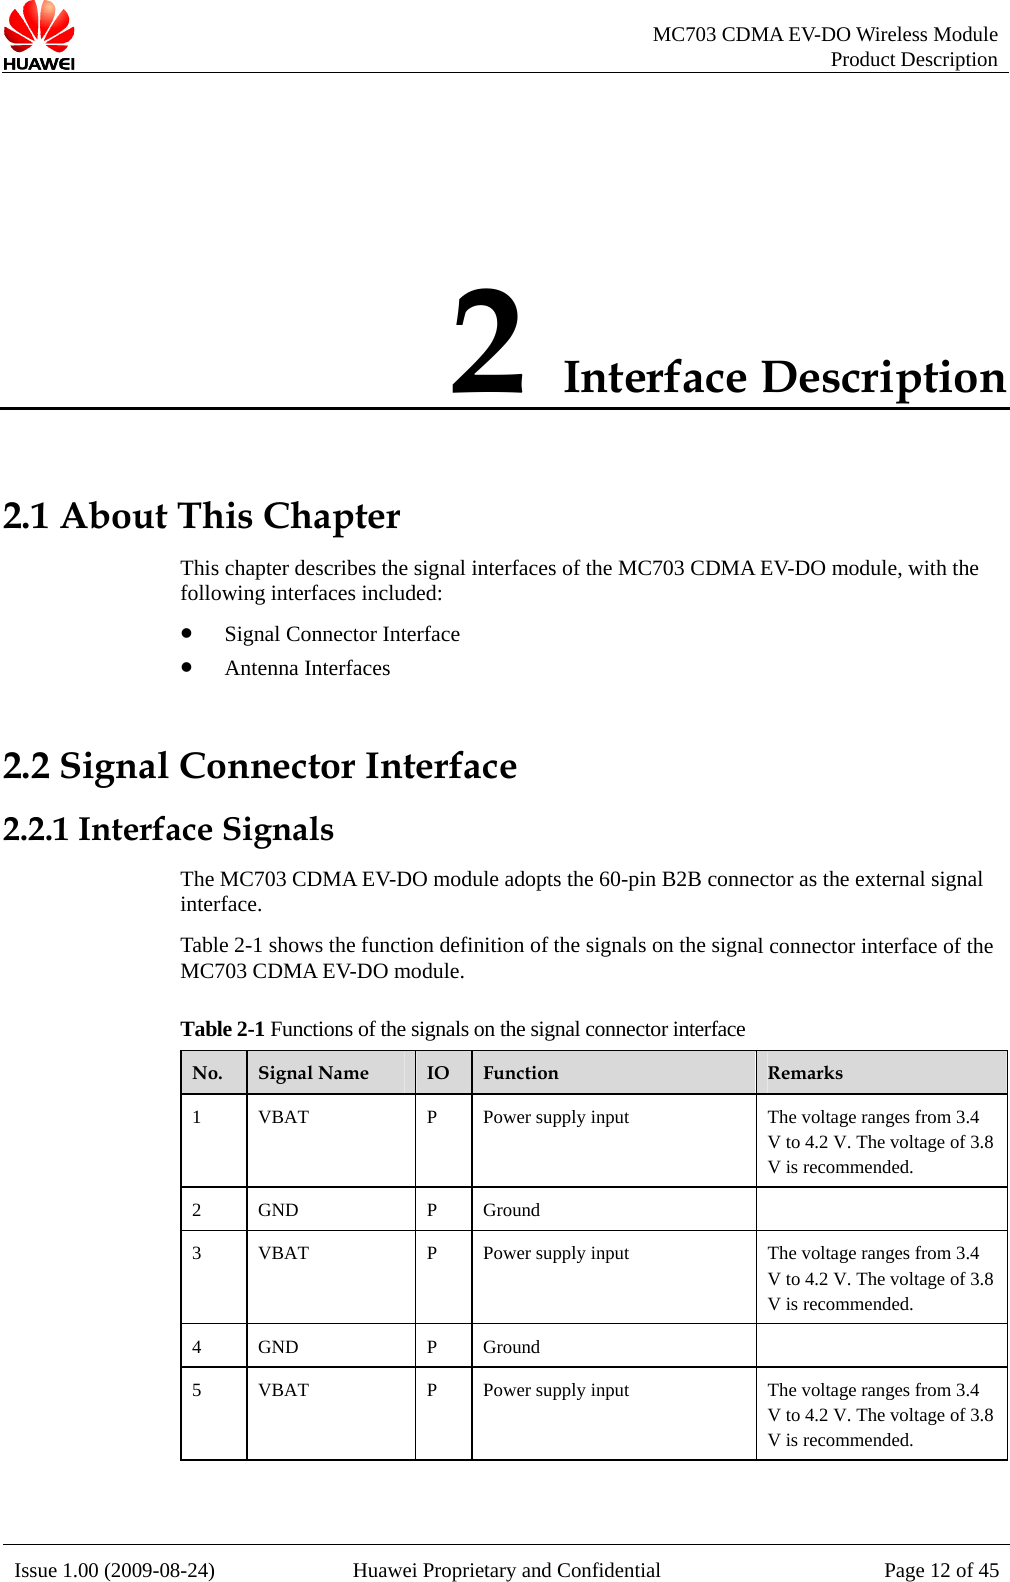   MC703 CDMA EV-DO Wireless Module Product Description Issue 1.00 (2009-08-24)  Huawei Proprietary and Confidential Page 12 of 452 Interface Description 2.1 About This Chapter gnal interfaces of the MC703 CDMA EV-DO module, with the following interfaces included: z Signal Connector Interface 2.2 Signal Connector Interface 2.2.1 Interface Signle adopts the 60-pin B2B connector as the external signal interface. l connector interface of the M 3   mo . Table 2- ns of the signals o tor interface This chapter describes the siz Antenna Interfaces als The MC703 CDMA EV-DO moduTable 2-1 shows the function definition of the signals on the signaC70 CDMA EV-DO dule1 Functio n the signal connecNo.  Signal Name  IO  Function  Remarks 1  VBAT  pply input  he voltage ranges from 3.4  P  Power su TV to 4.2 V. The voltage of 3.8V is recommended. 2 GND  P Ground   3  VBAT  pply input  he voltage ranges from 3.4  P  Power su TV to 4.2 V. The voltage of 3.8V is recommended. 4 GND  P Ground   5  VBAT  pply input  he voltage ranges from 3.4  P  Power su TV to 4.2 V. The voltage of 3.8V is recommended.  